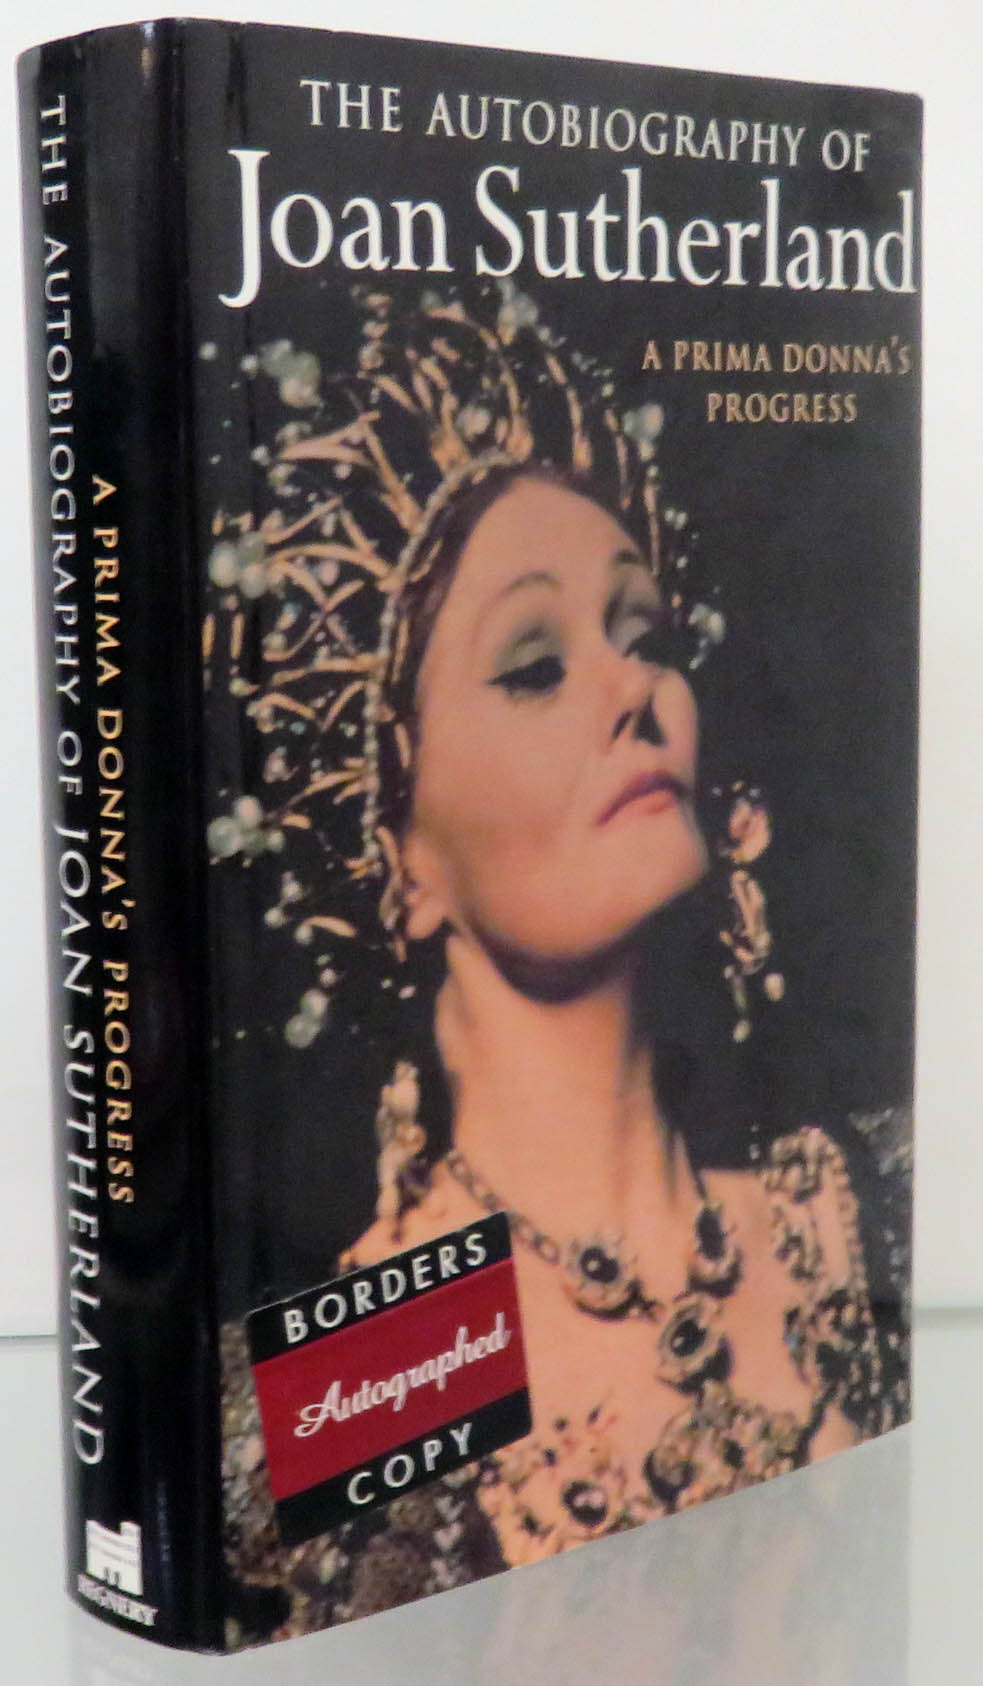 A Prima Donna's Progress The Autobiography of Joan Sutherland Signed First Edition 